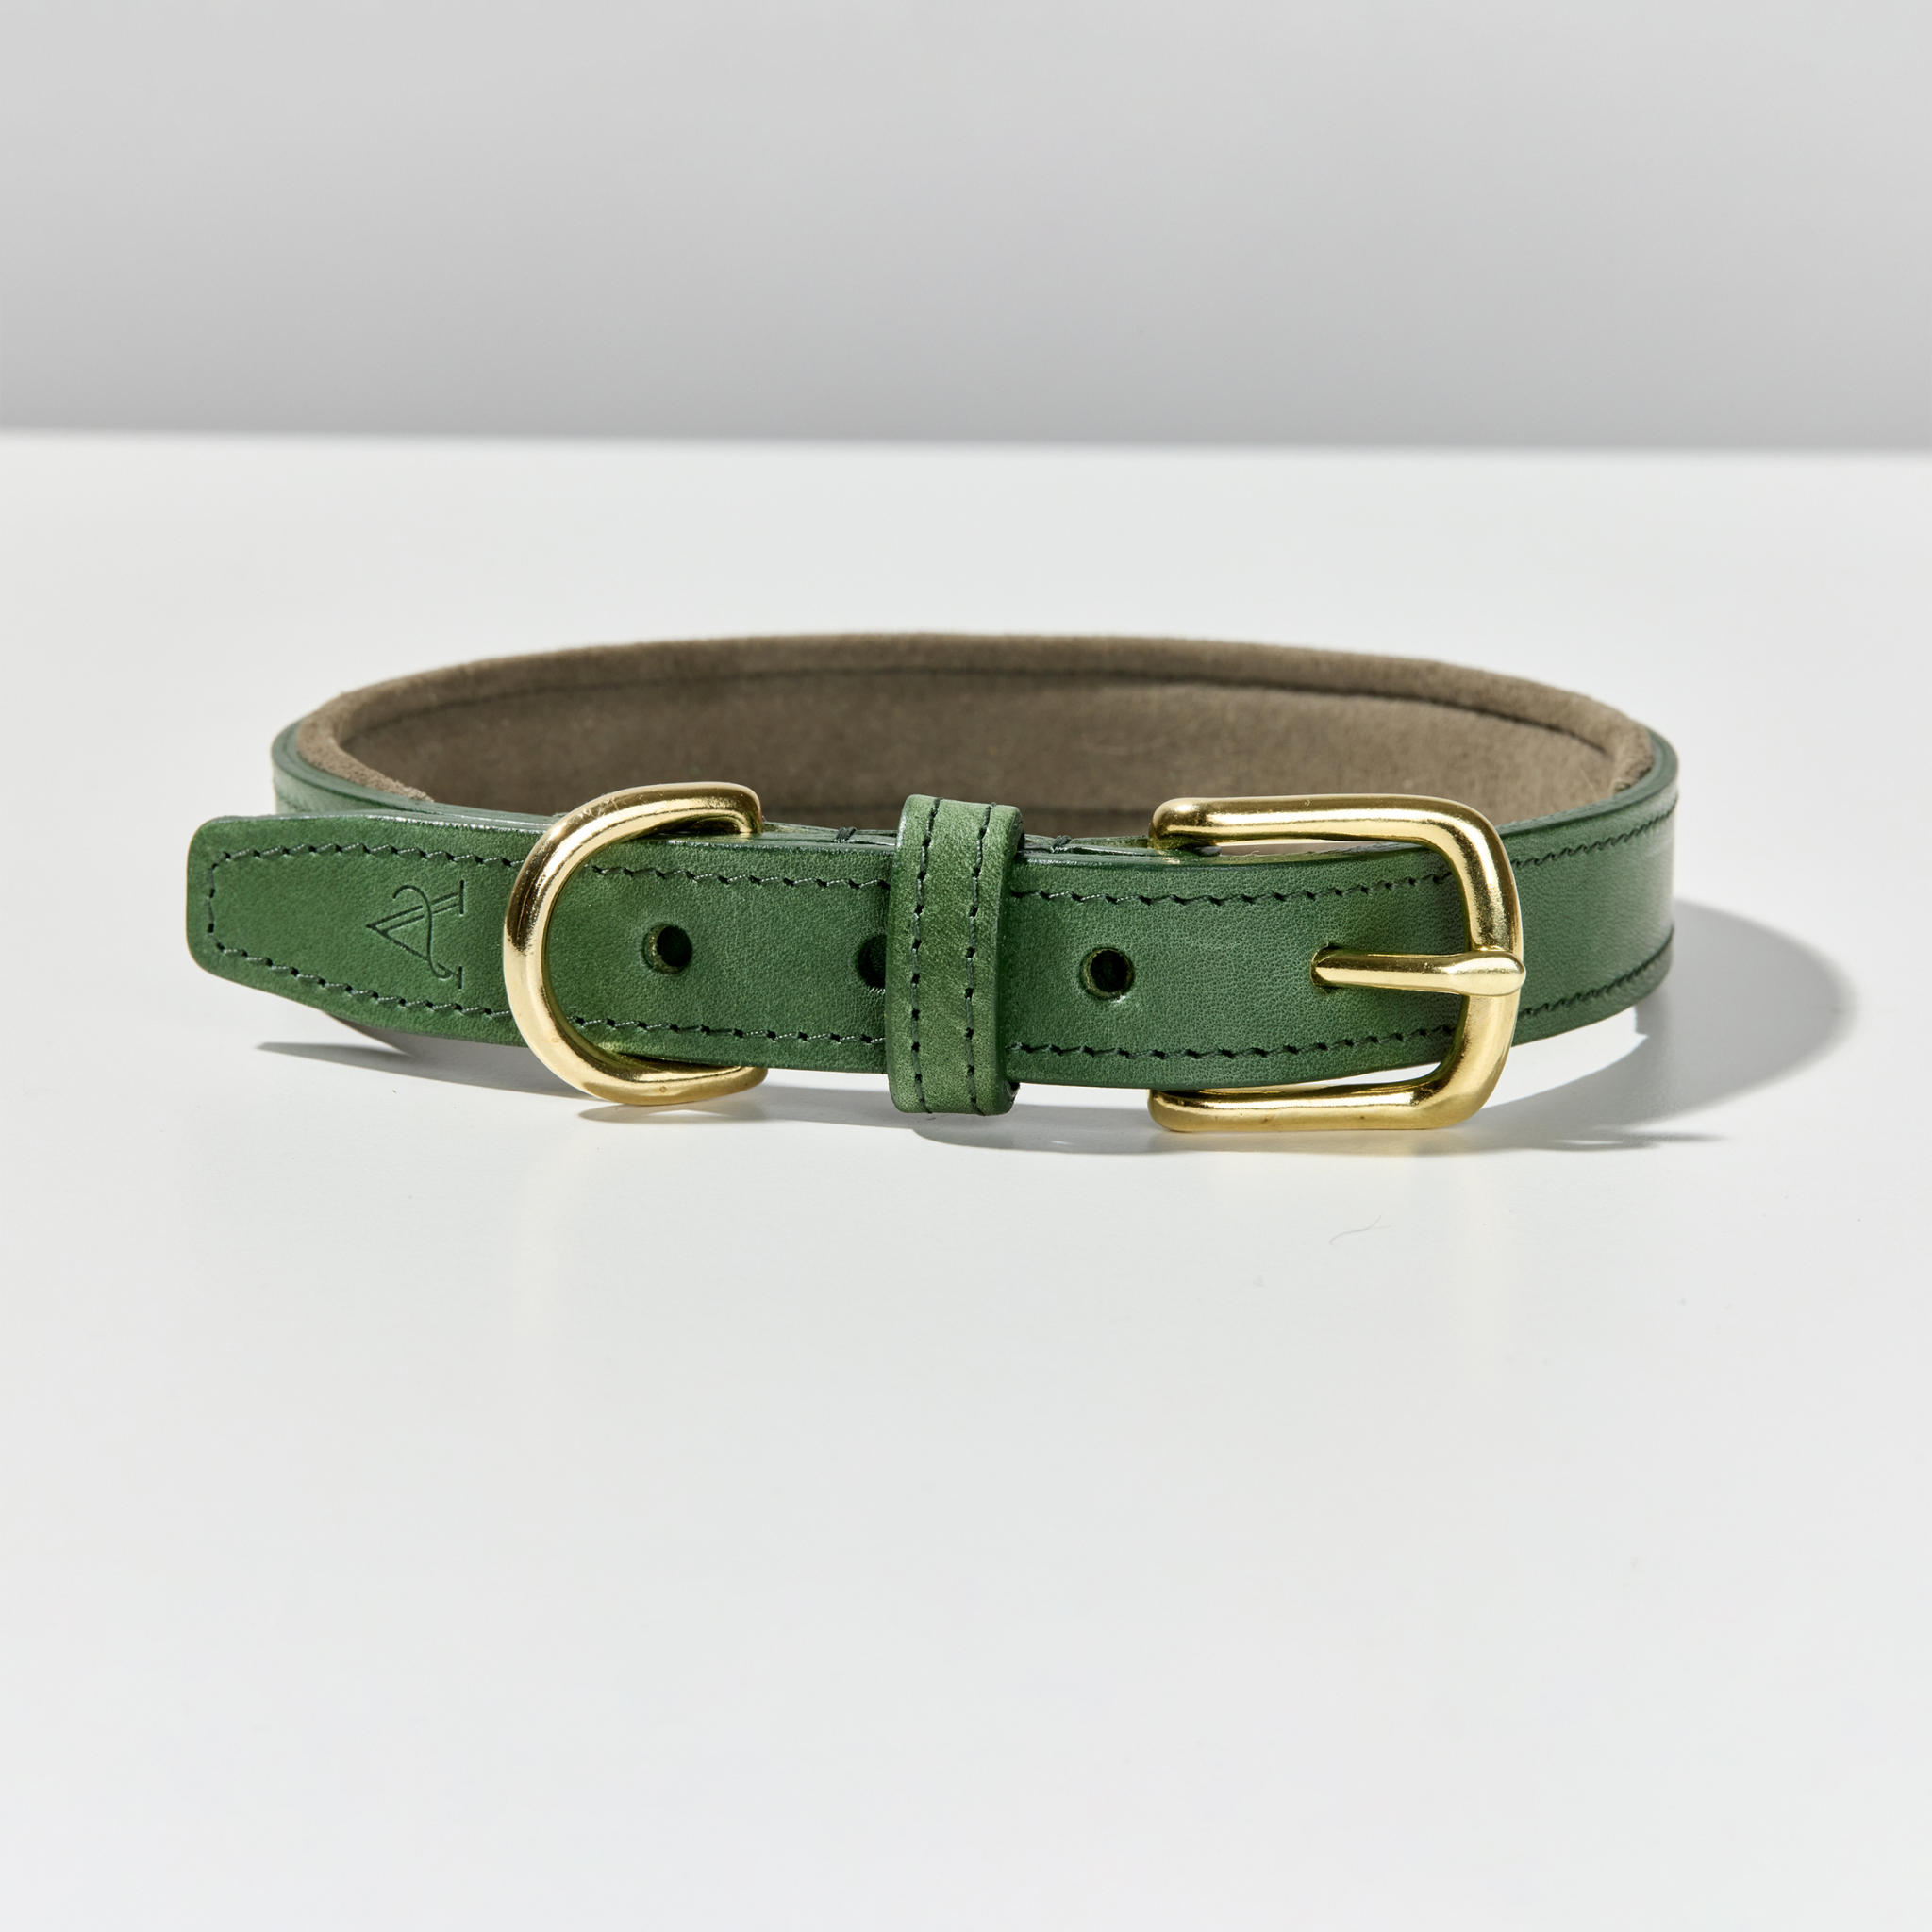 Padded Leather Dog Collar in Green